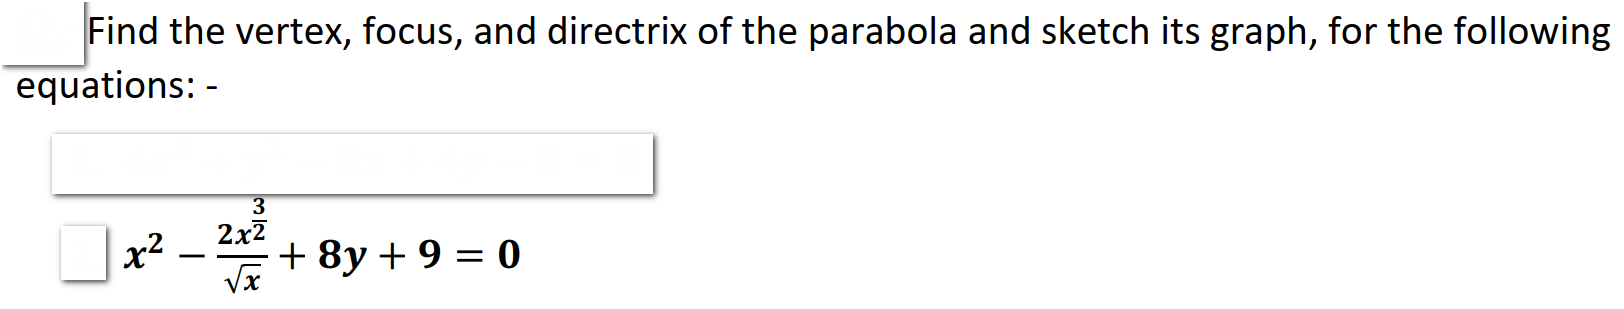 Find the vertex, focus, and directrix of the parabola and sketch its graph, for the following
equations: -
3
2x7
x2
+ 8y + 9 = 0
-
